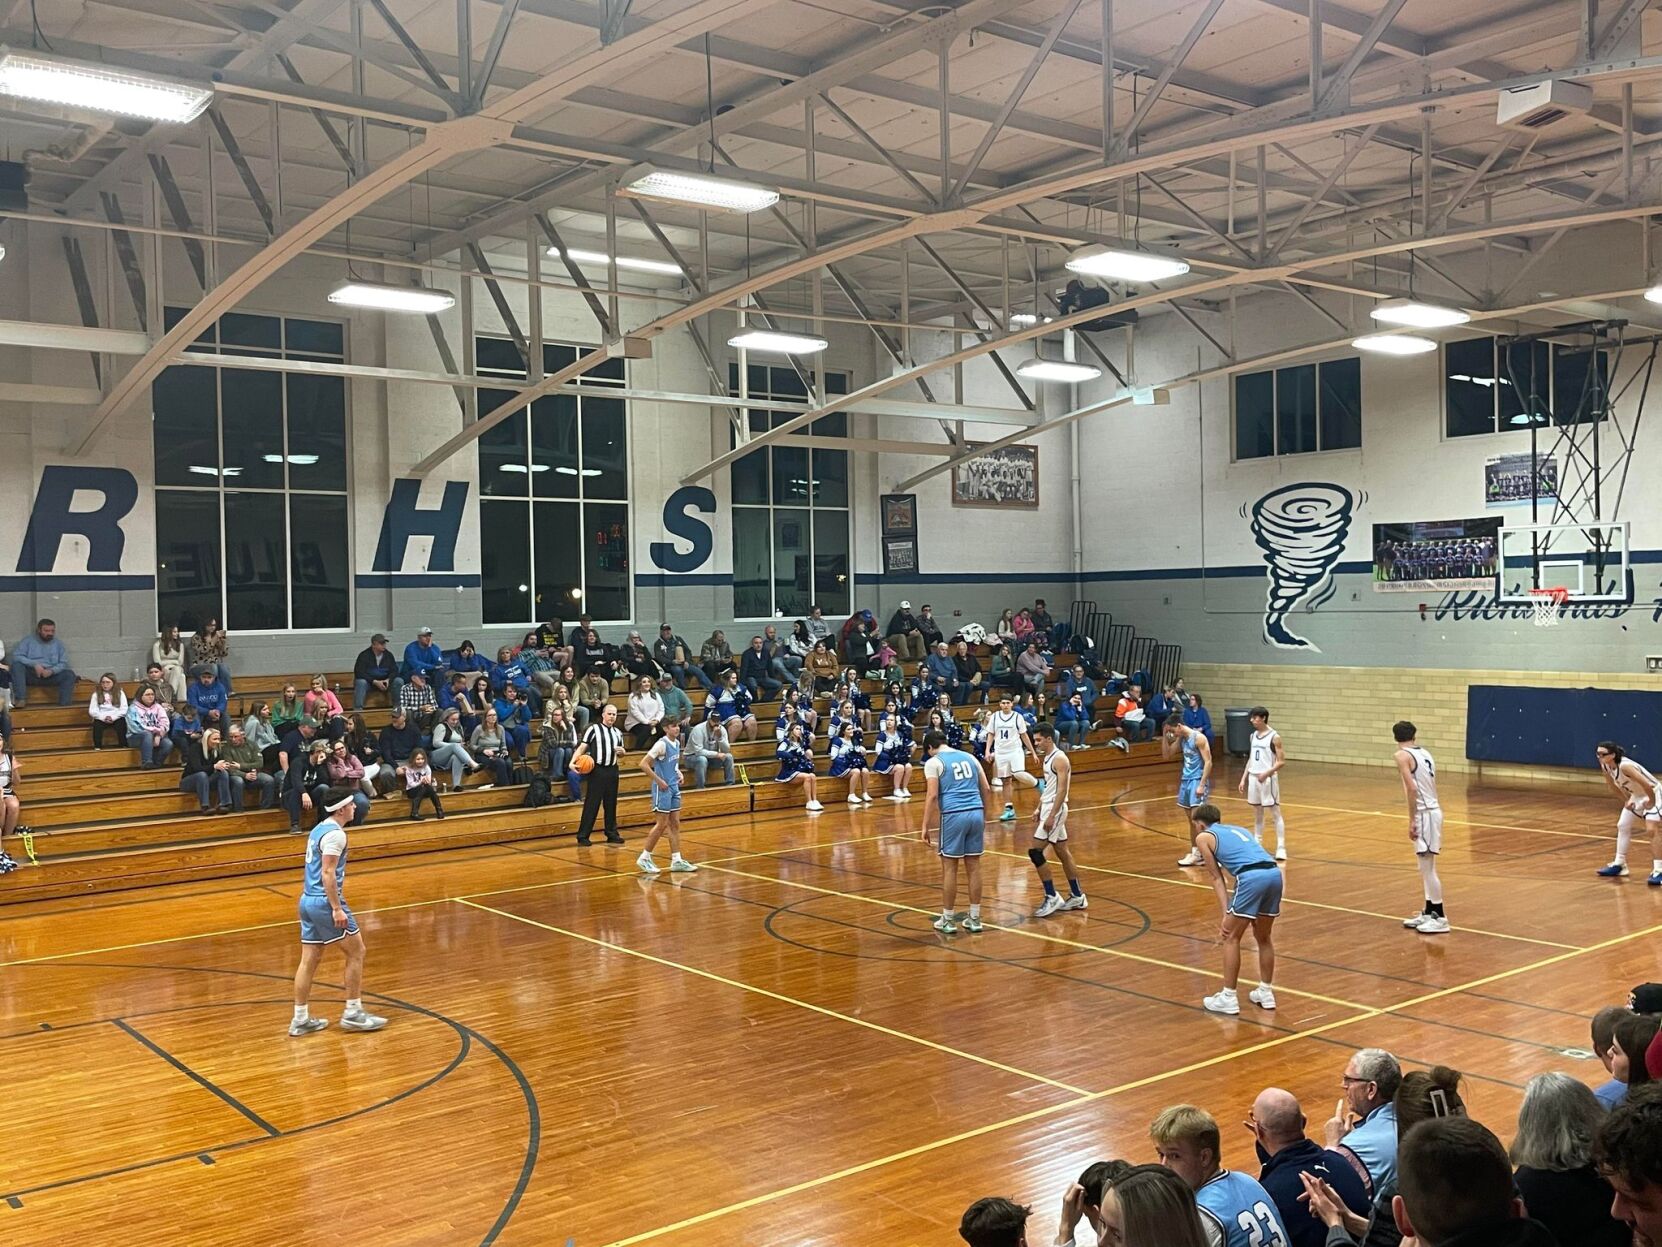 Richlands High School Introduces Throwback Uniforms and Old Gym Games: Wins Over Castlewood Blue Devils and East Ridge Warriors